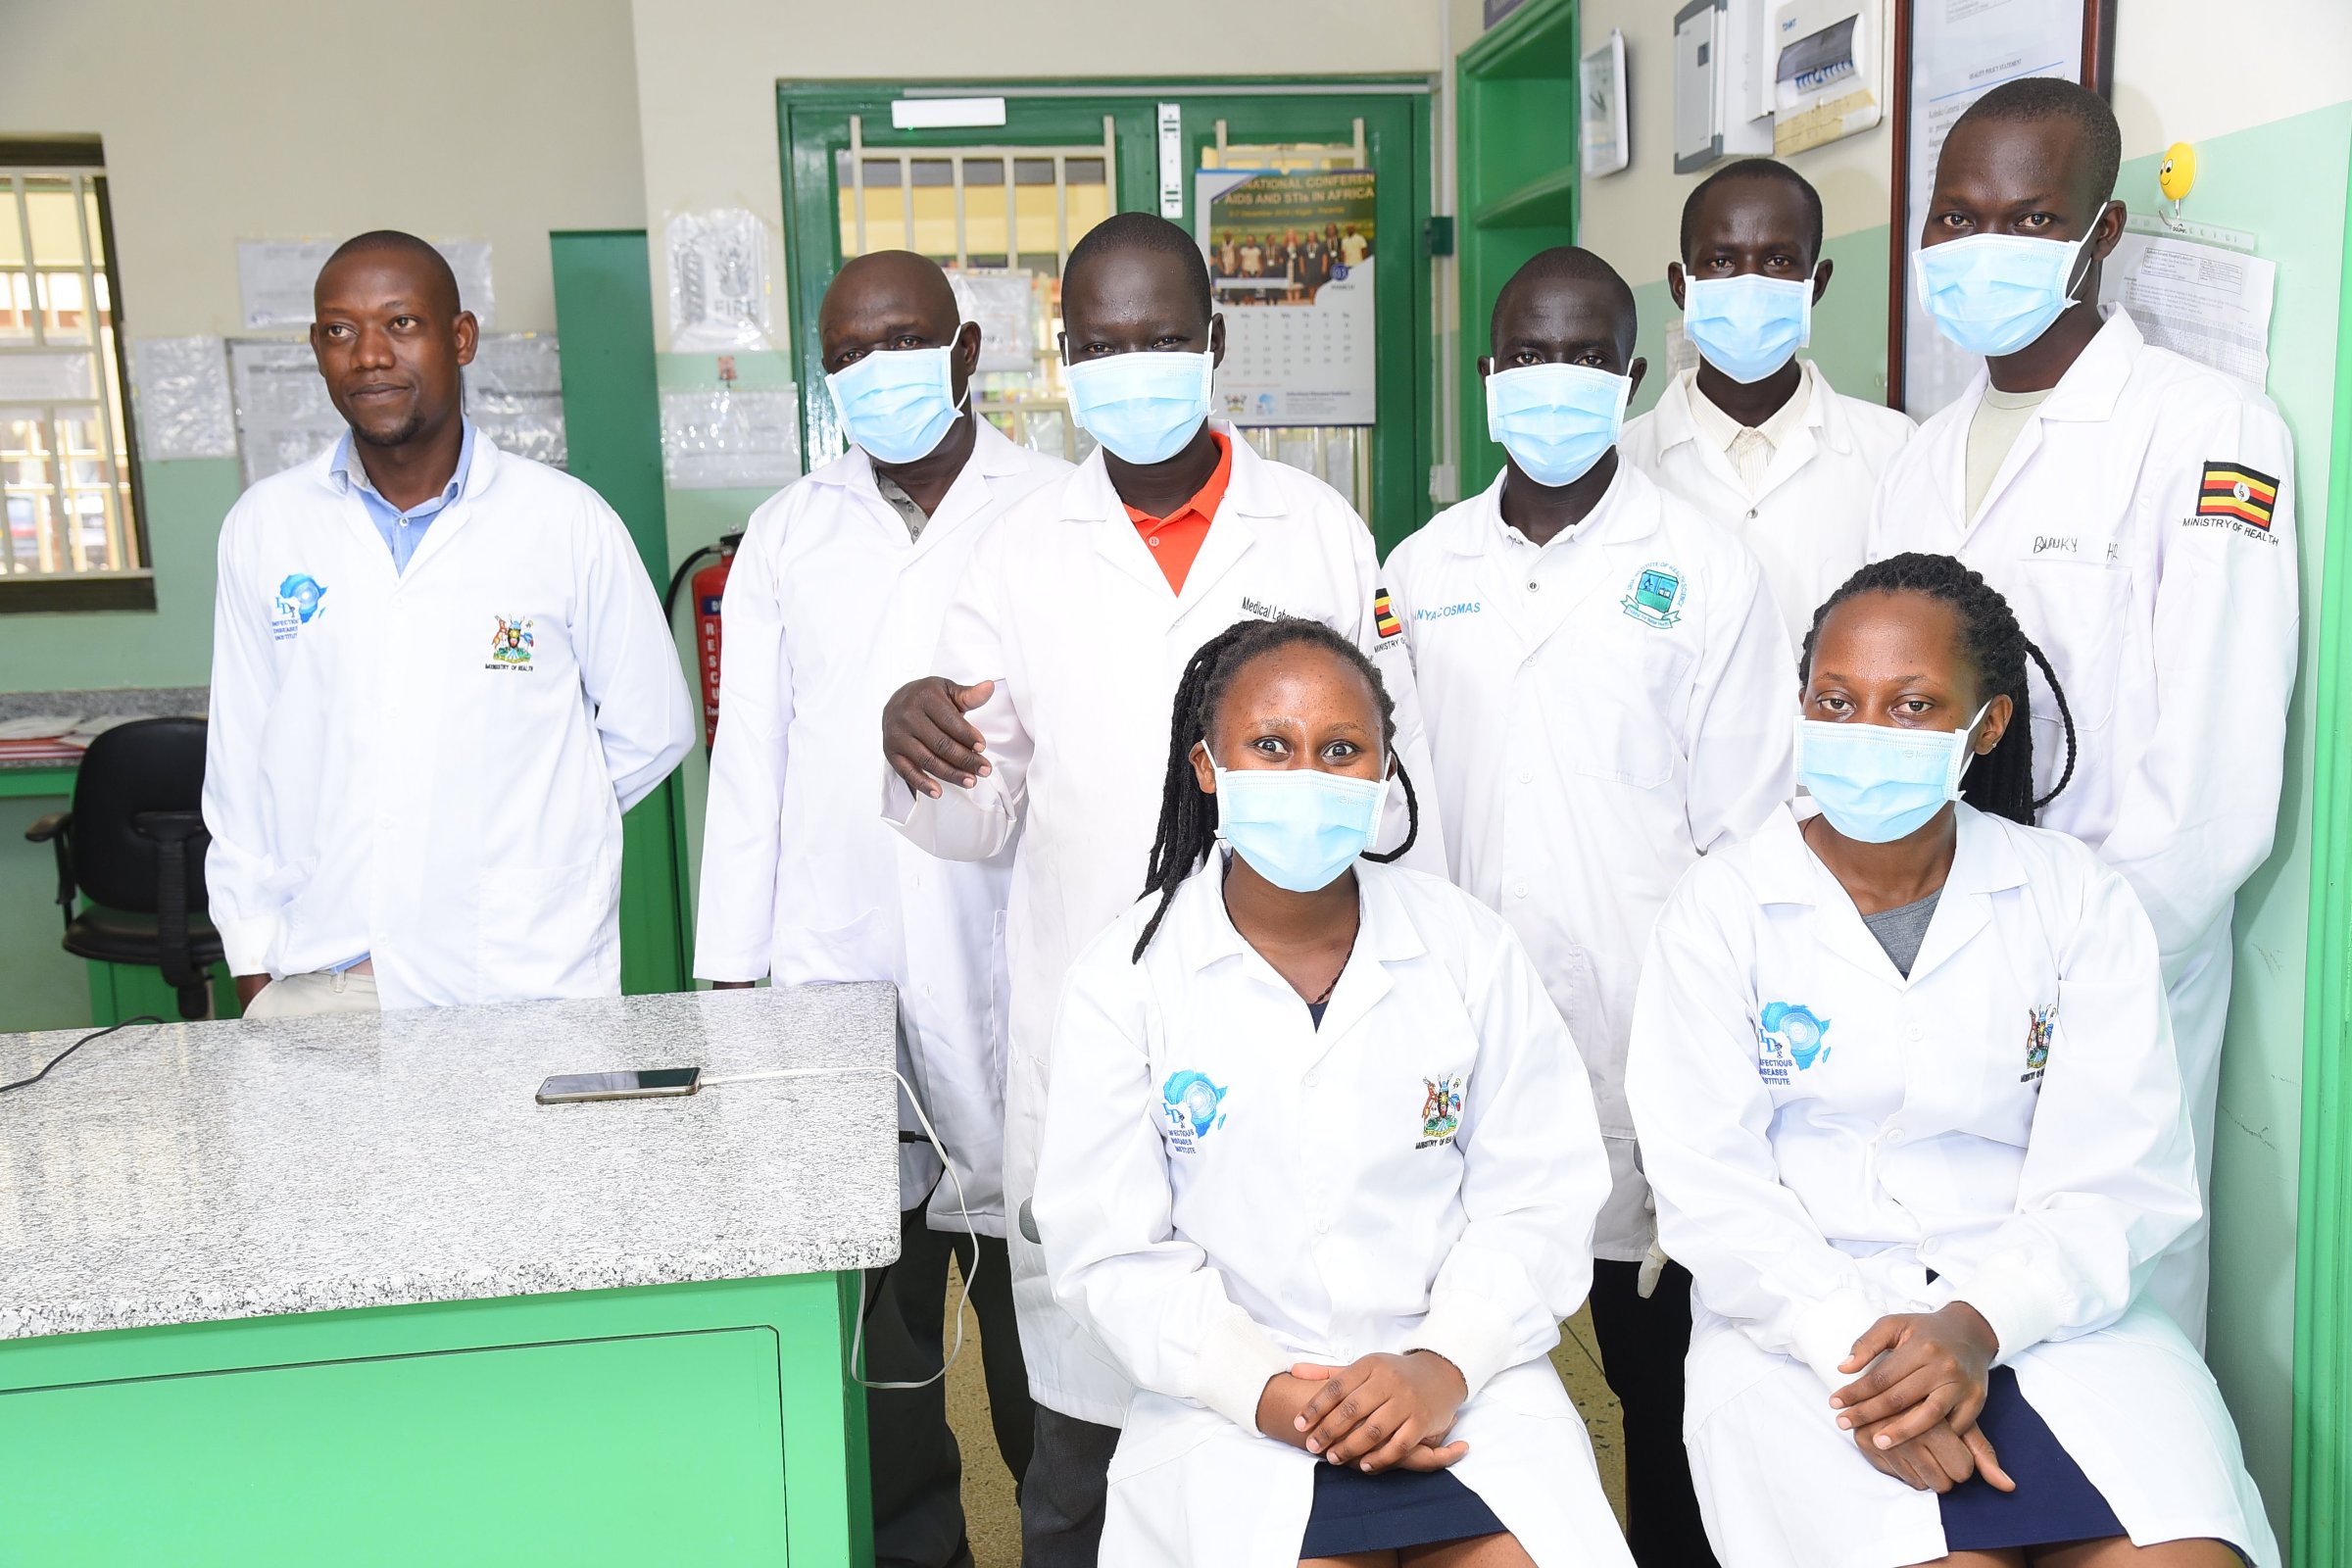 IDI Staff with Medical Laboratory Technologists from the West Nile Region, April 2021.